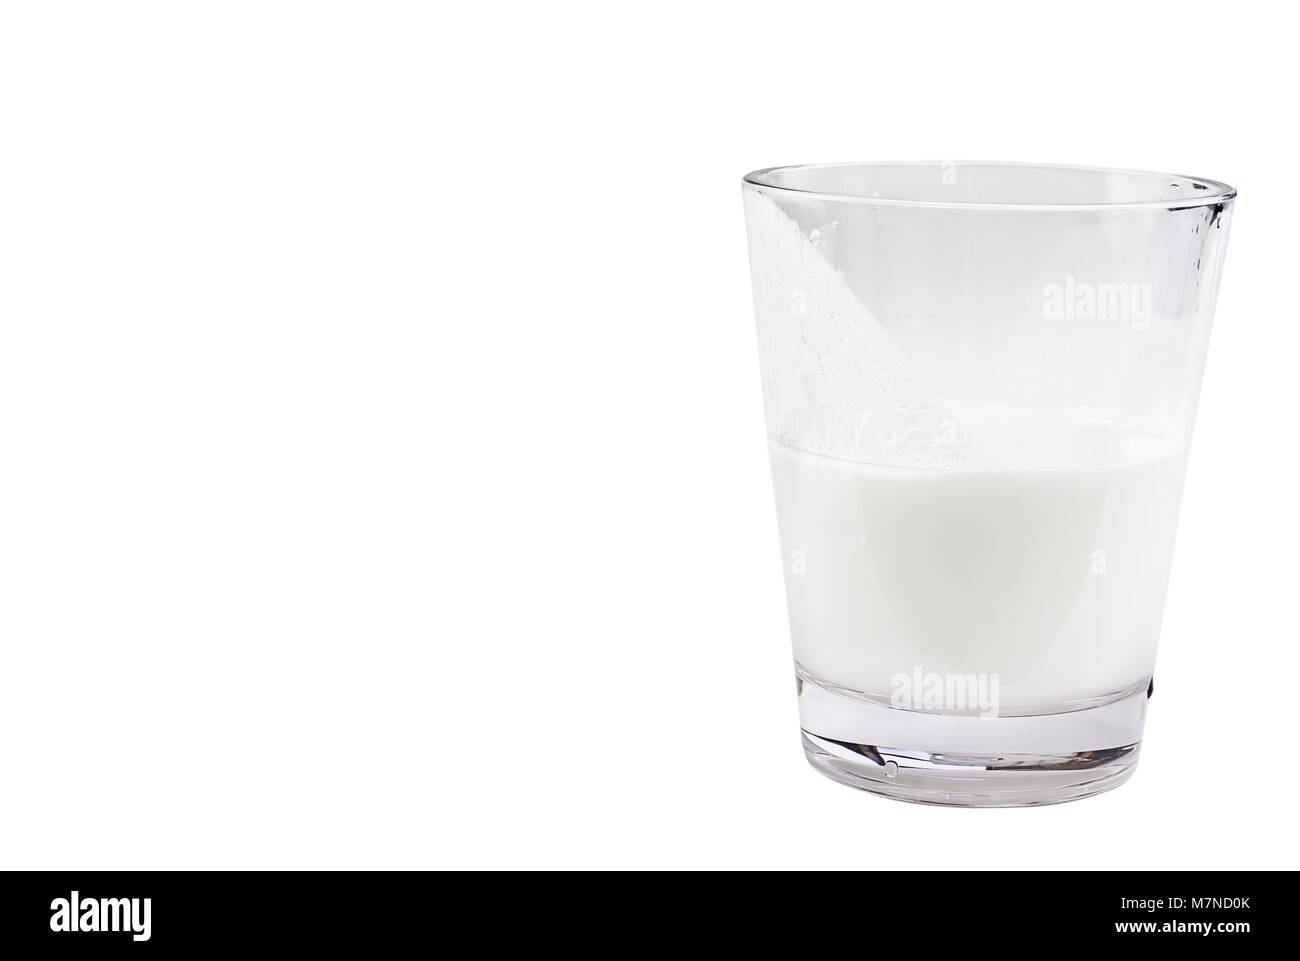 Isolated Kefir milk over white background with clipping path included. Kefir is one of the top health foods available providing powerful probiotics. Stock Photo